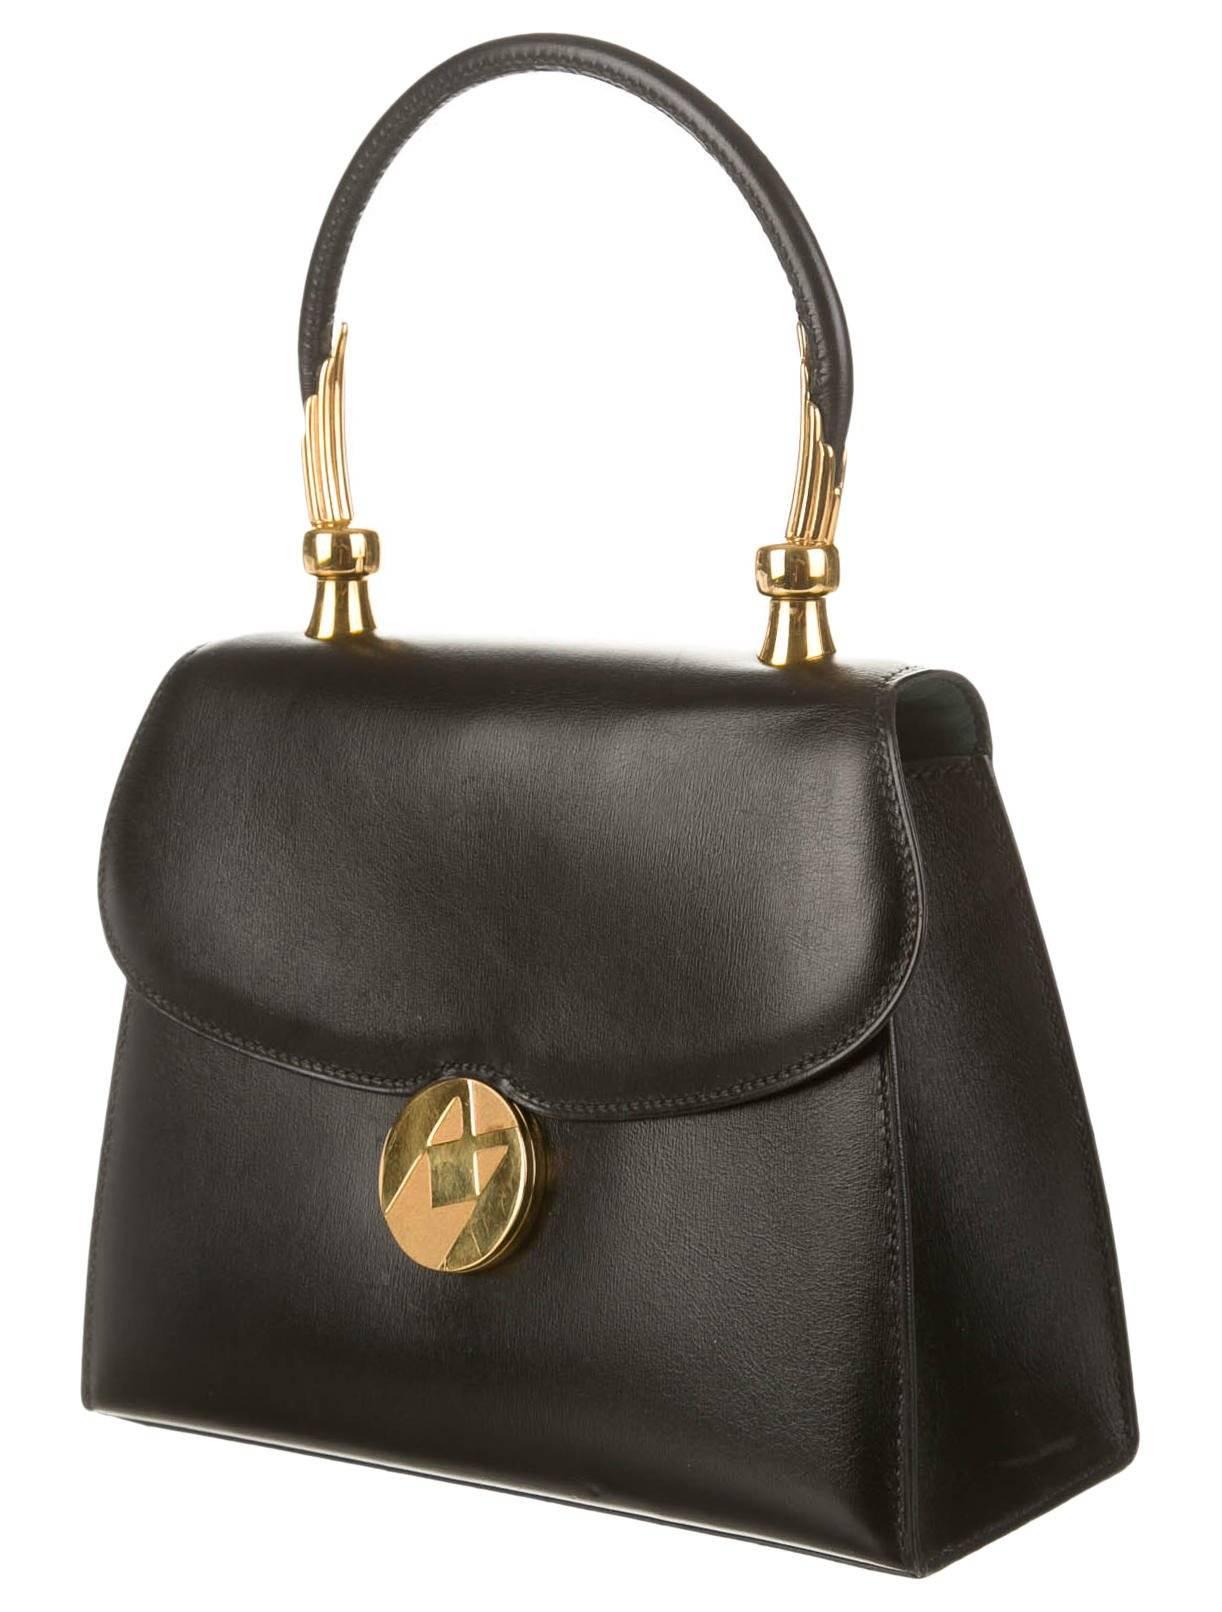 Hermes Black Leather Gold Emblem Kelly Top Handle Satchel Bag In Good Condition In Chicago, IL